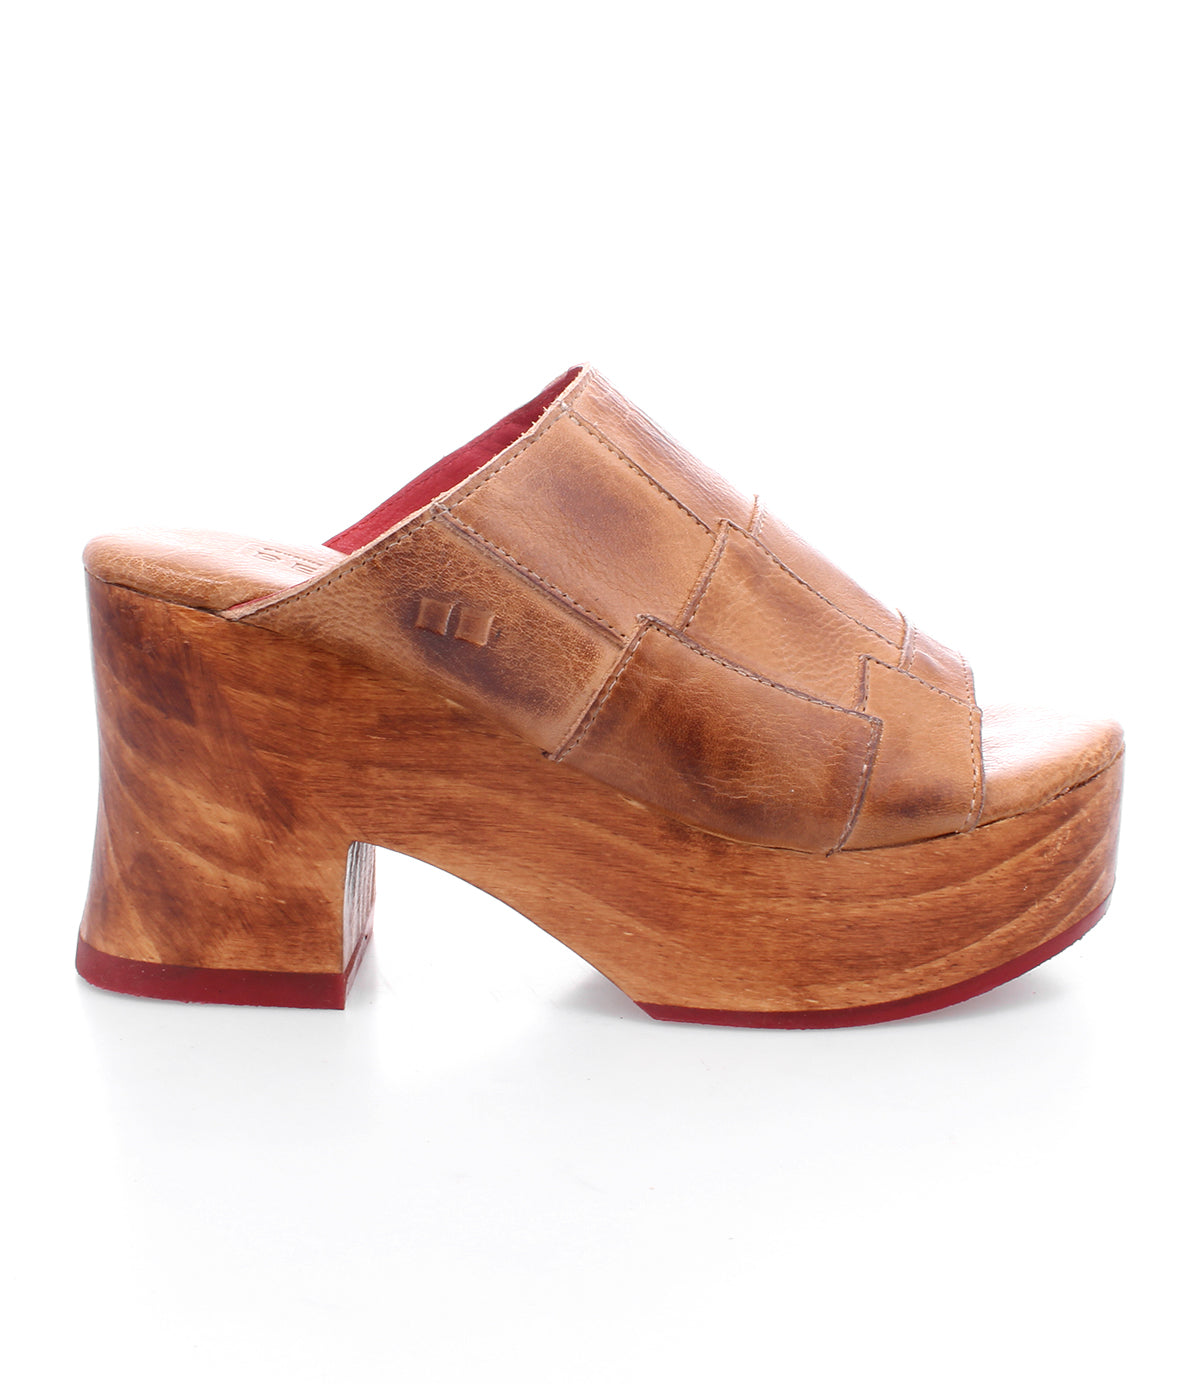 A women's open-toe wooden clog with a red sole by Bed Stu's Vanquish.